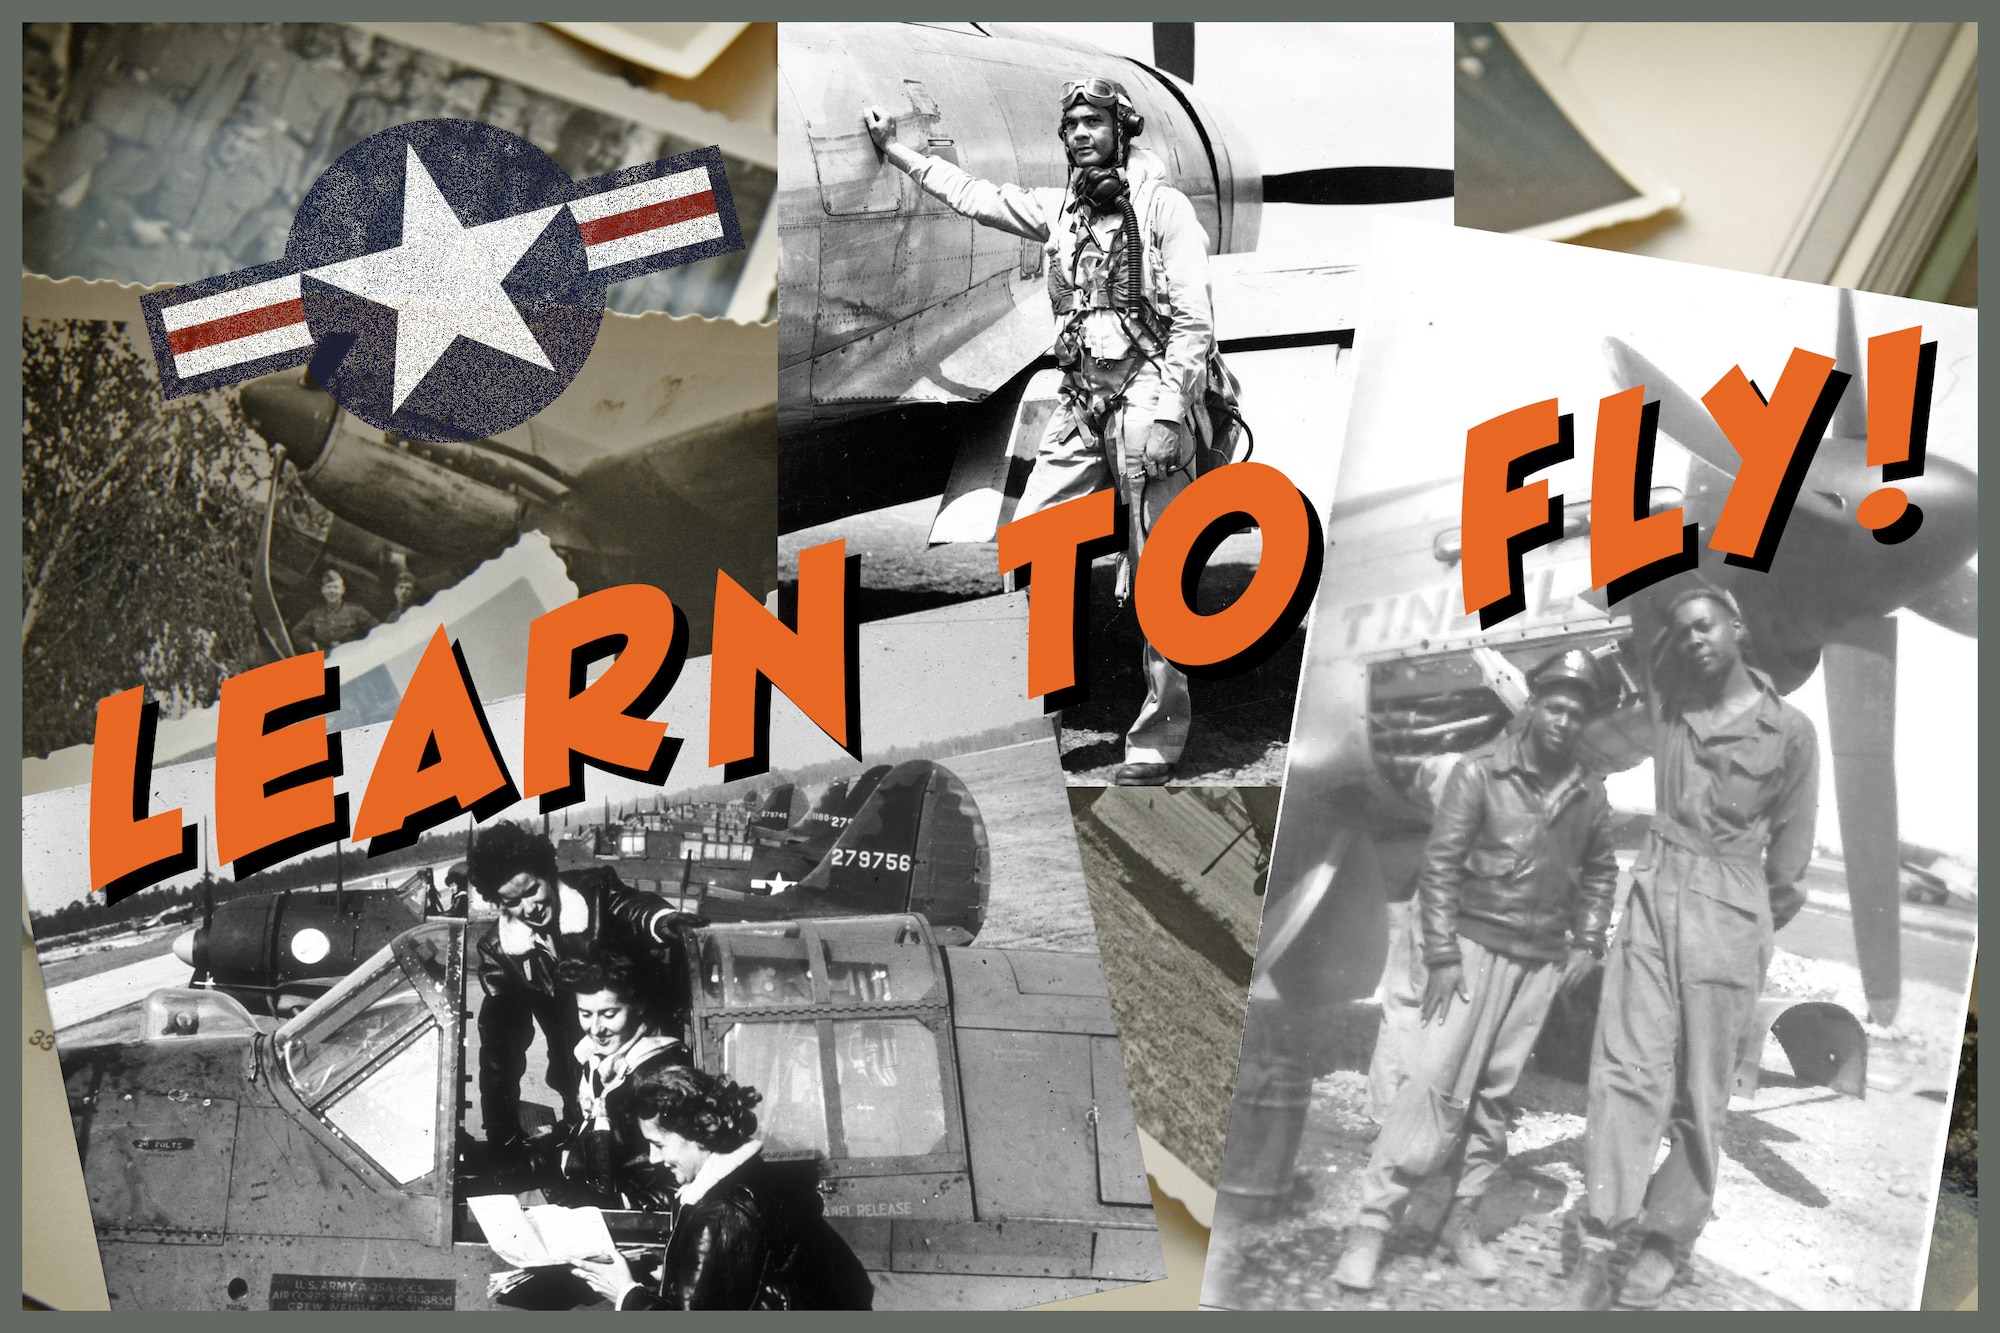 On June 27, 1939, President Franklin D. Roosevelt signed the Civilian Pilot Training Act into law.